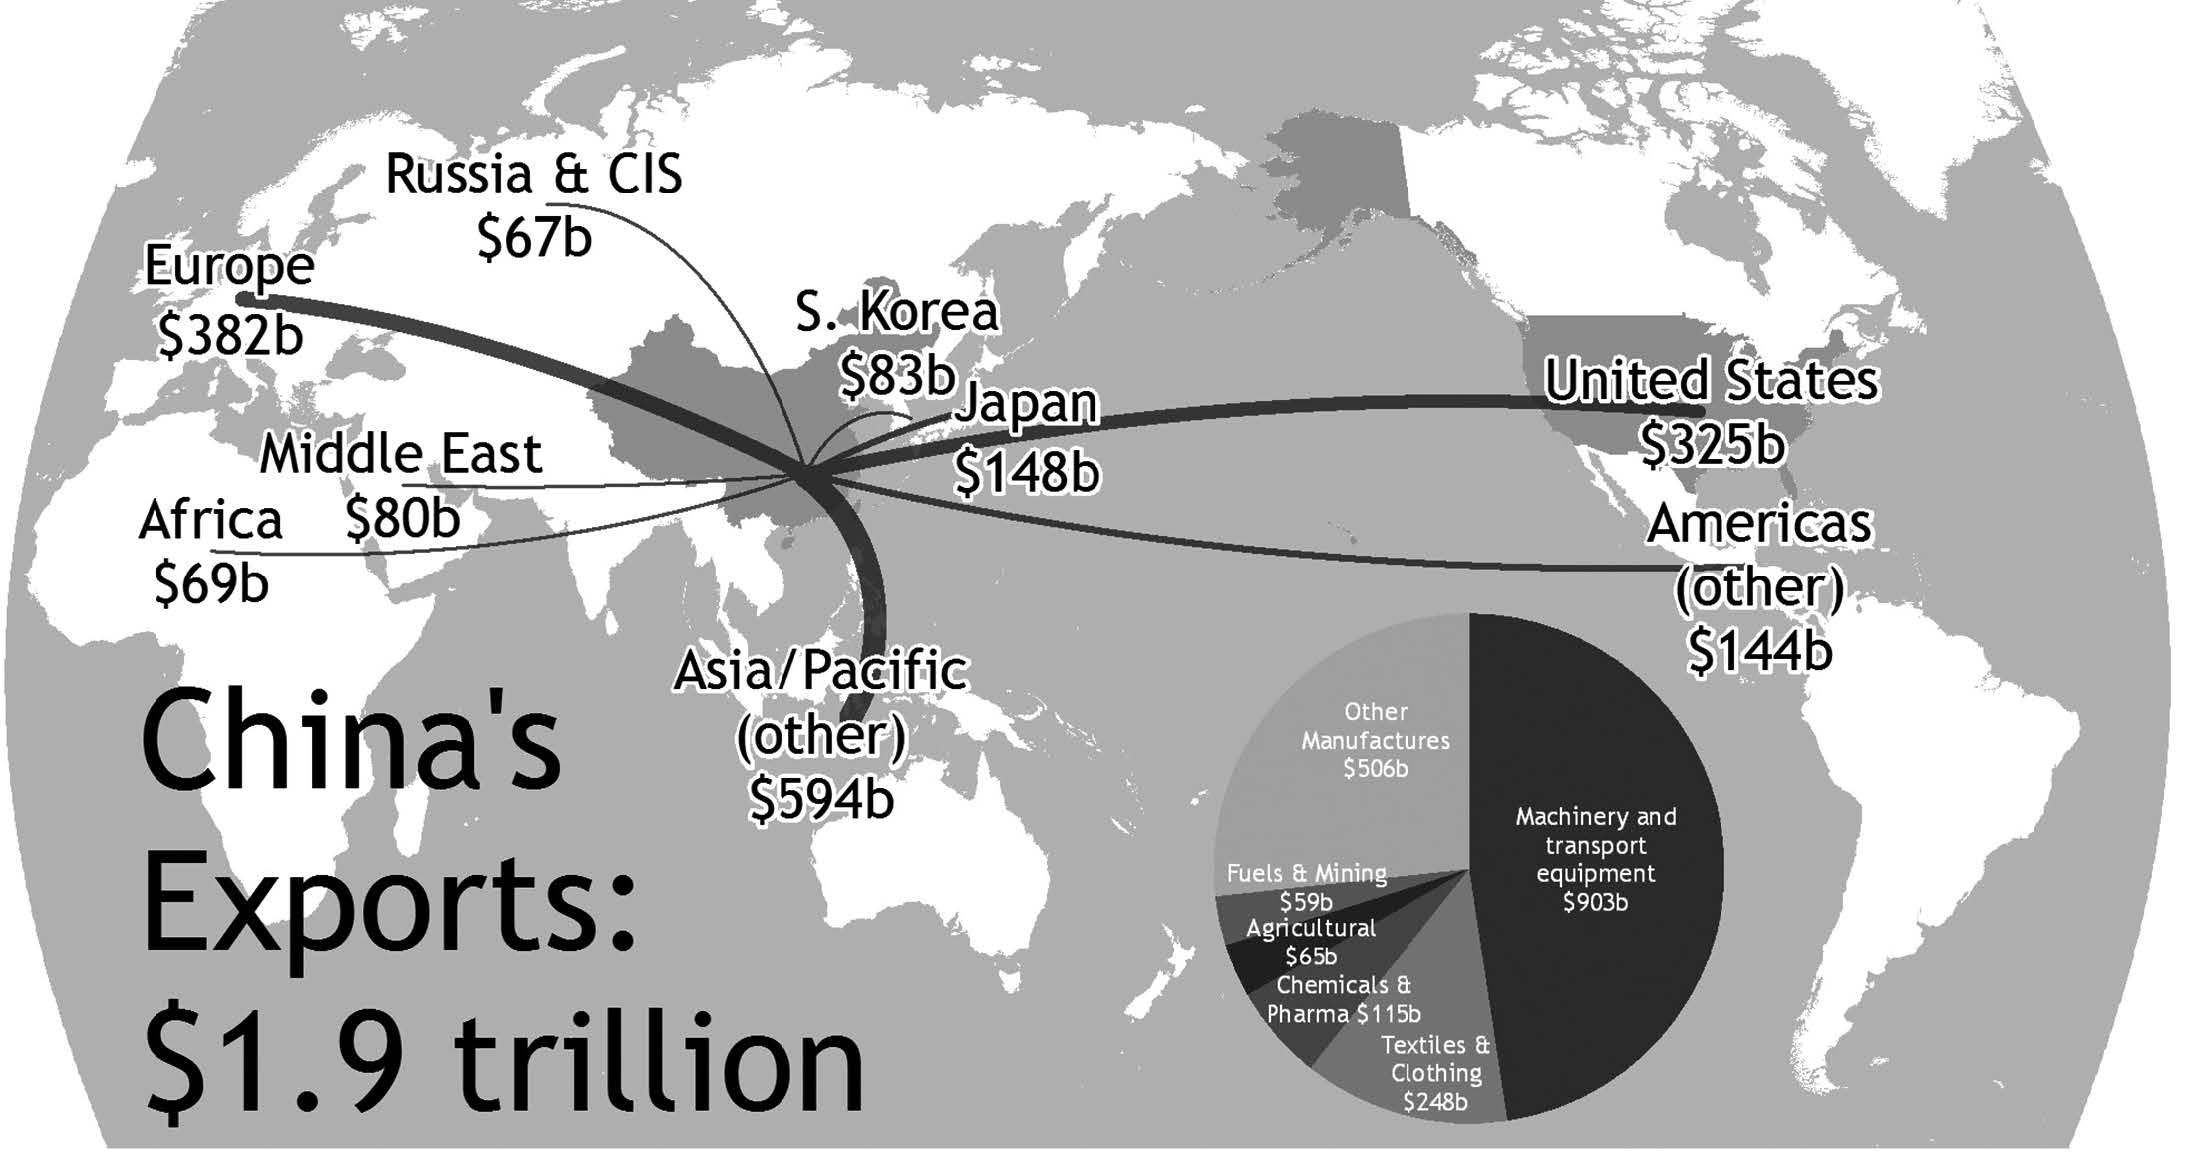 China’s exports by major category and region (US$ billions). 